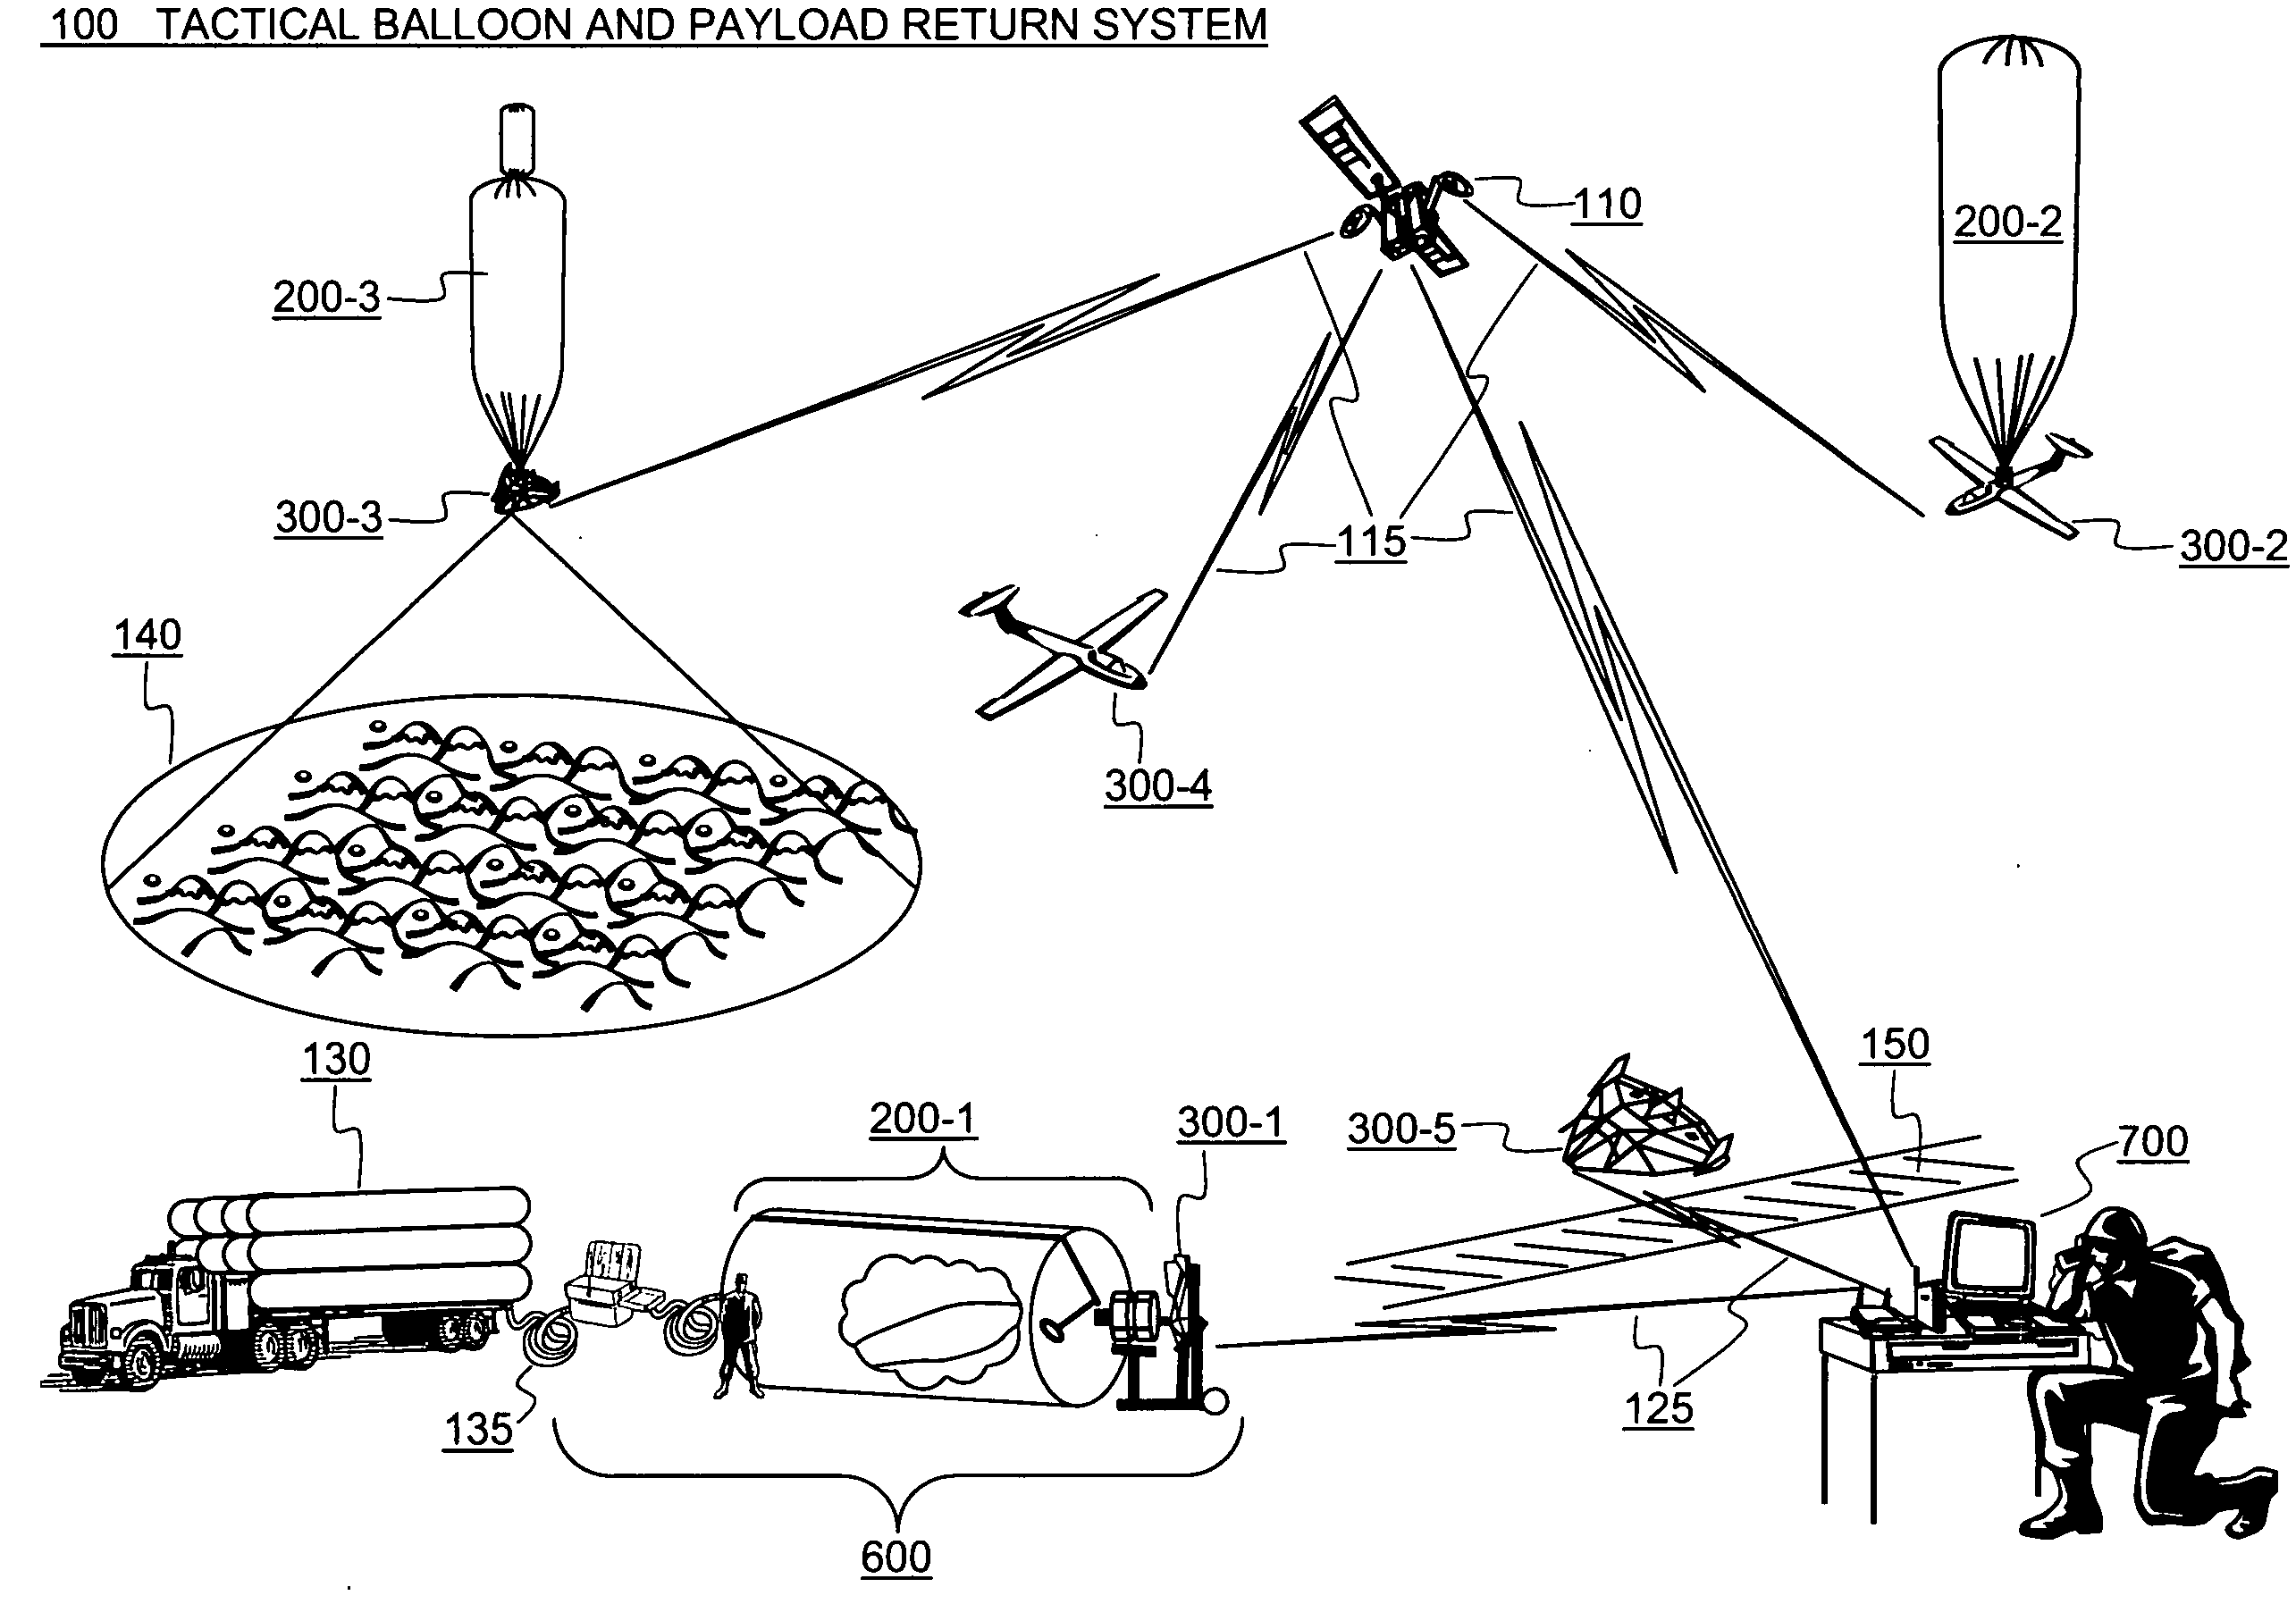 System for tactical balloon launch and payload return